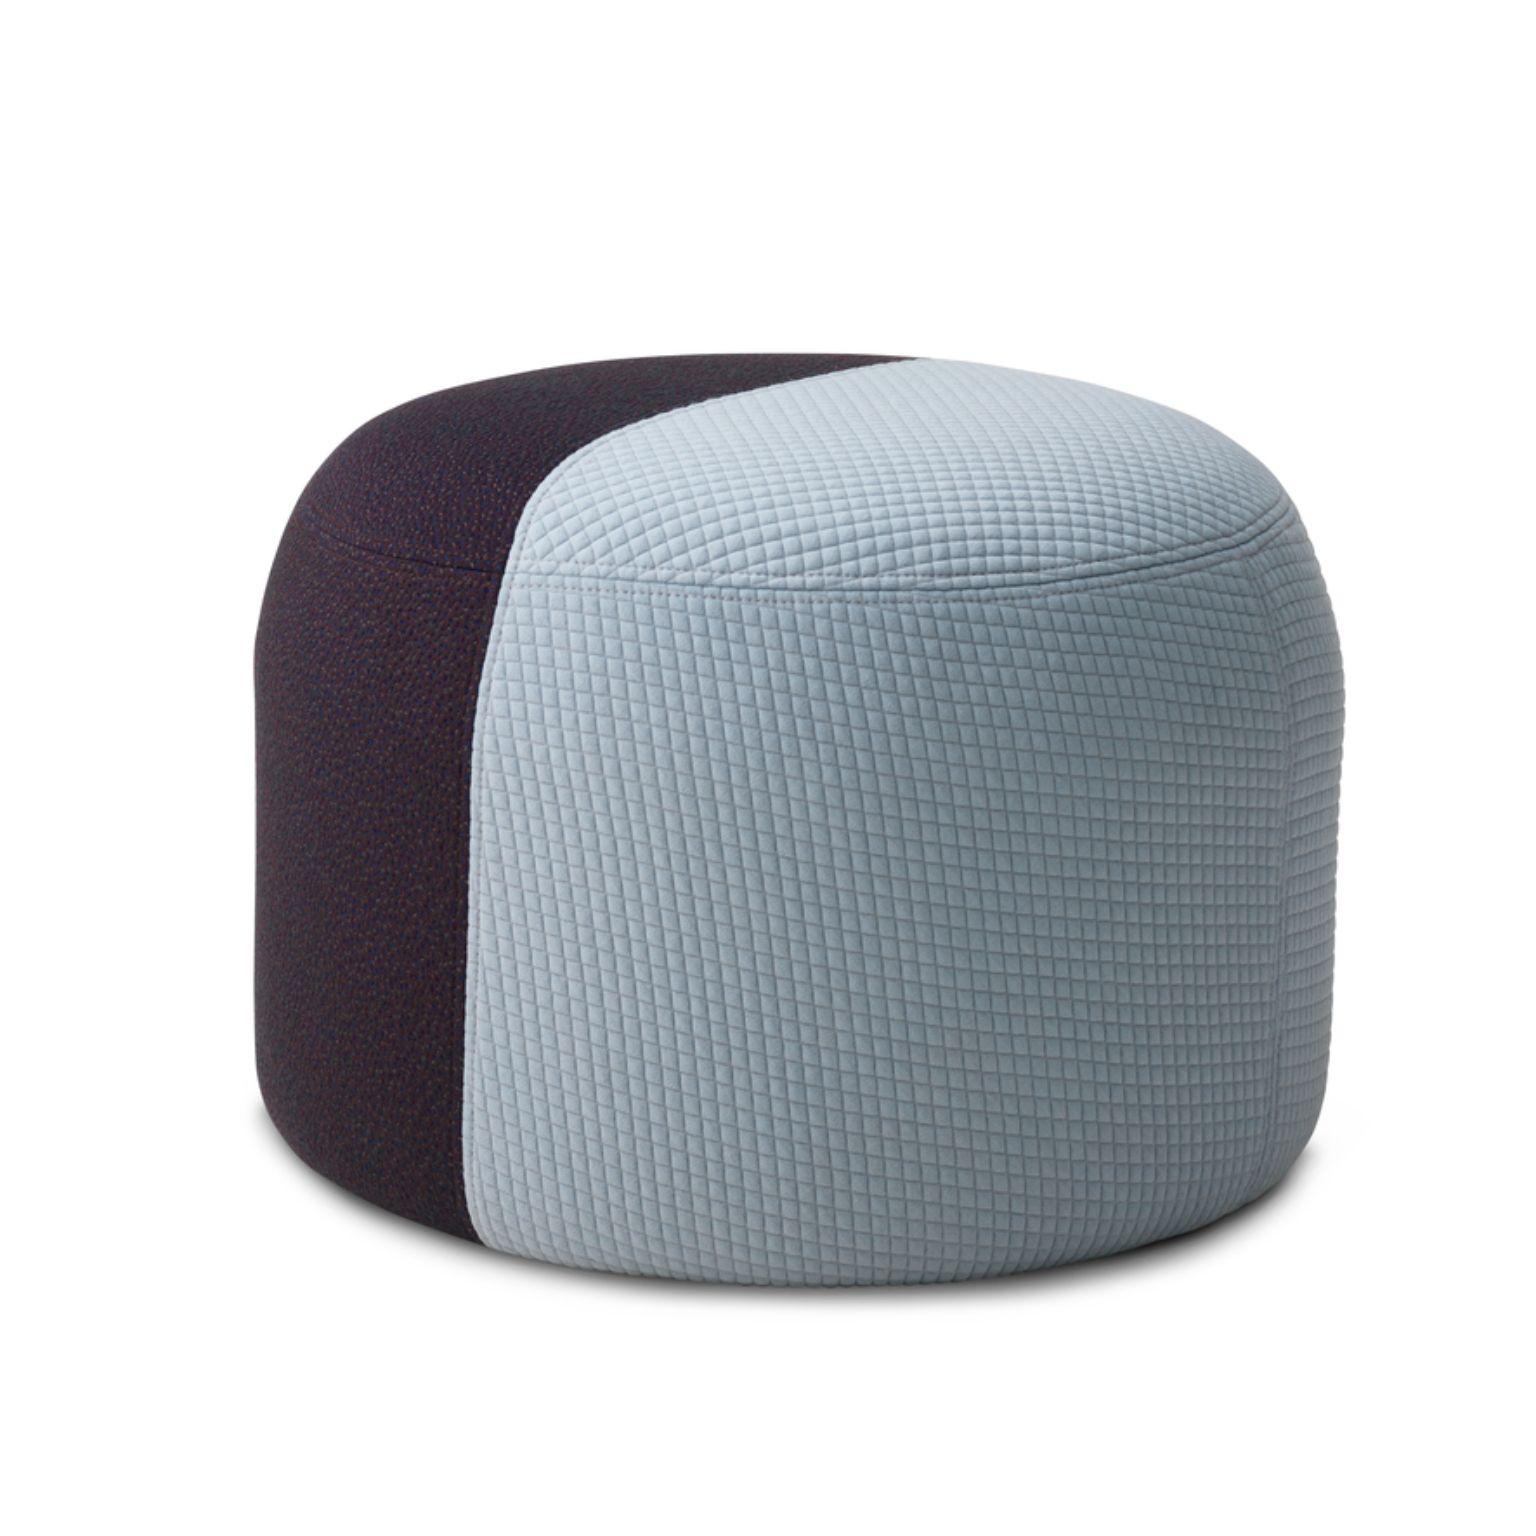 Dainty Pouf Mosaic light blue eggplant by Warm Nordic
Dimensions: D 55 x H 39 cm
Material: Textile upholstery, Wooden frame, foam.
Weight: 9.5 kg
Also available in different colours and finishes.

Sophisticated, two-coloured pouf with soft shapes